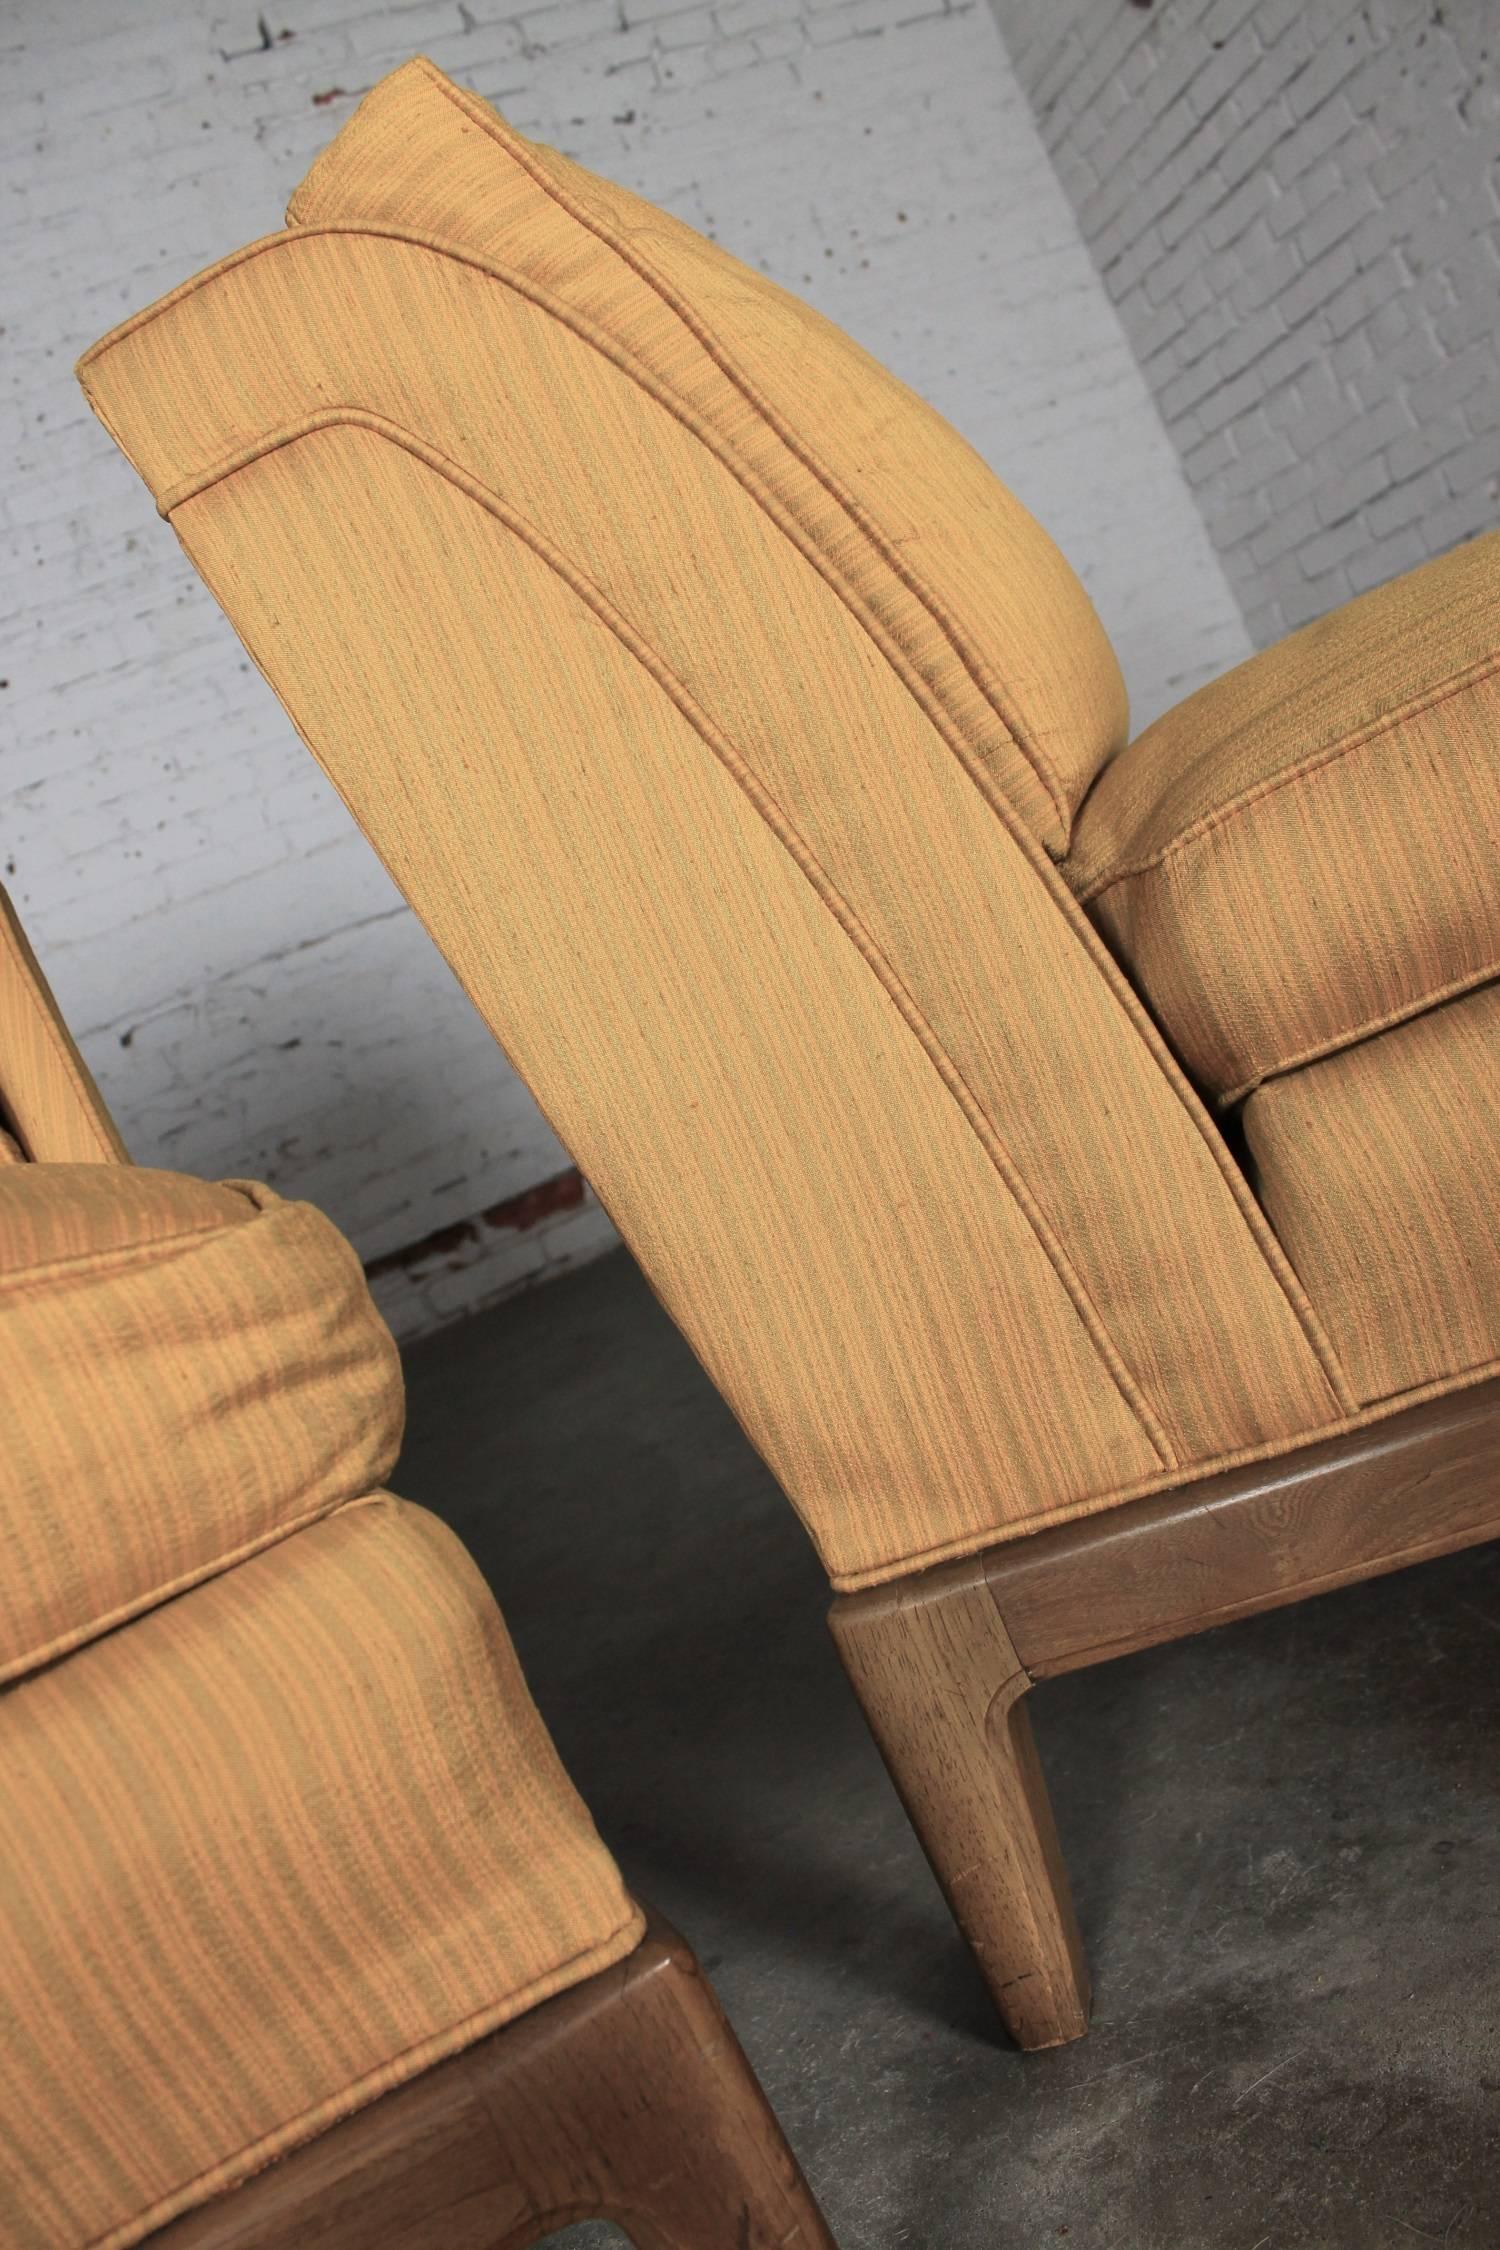 20th Century Gold Slipper Chairs, Drexel for Sears Symphony Vintage, Mid-Century Modern, Pair